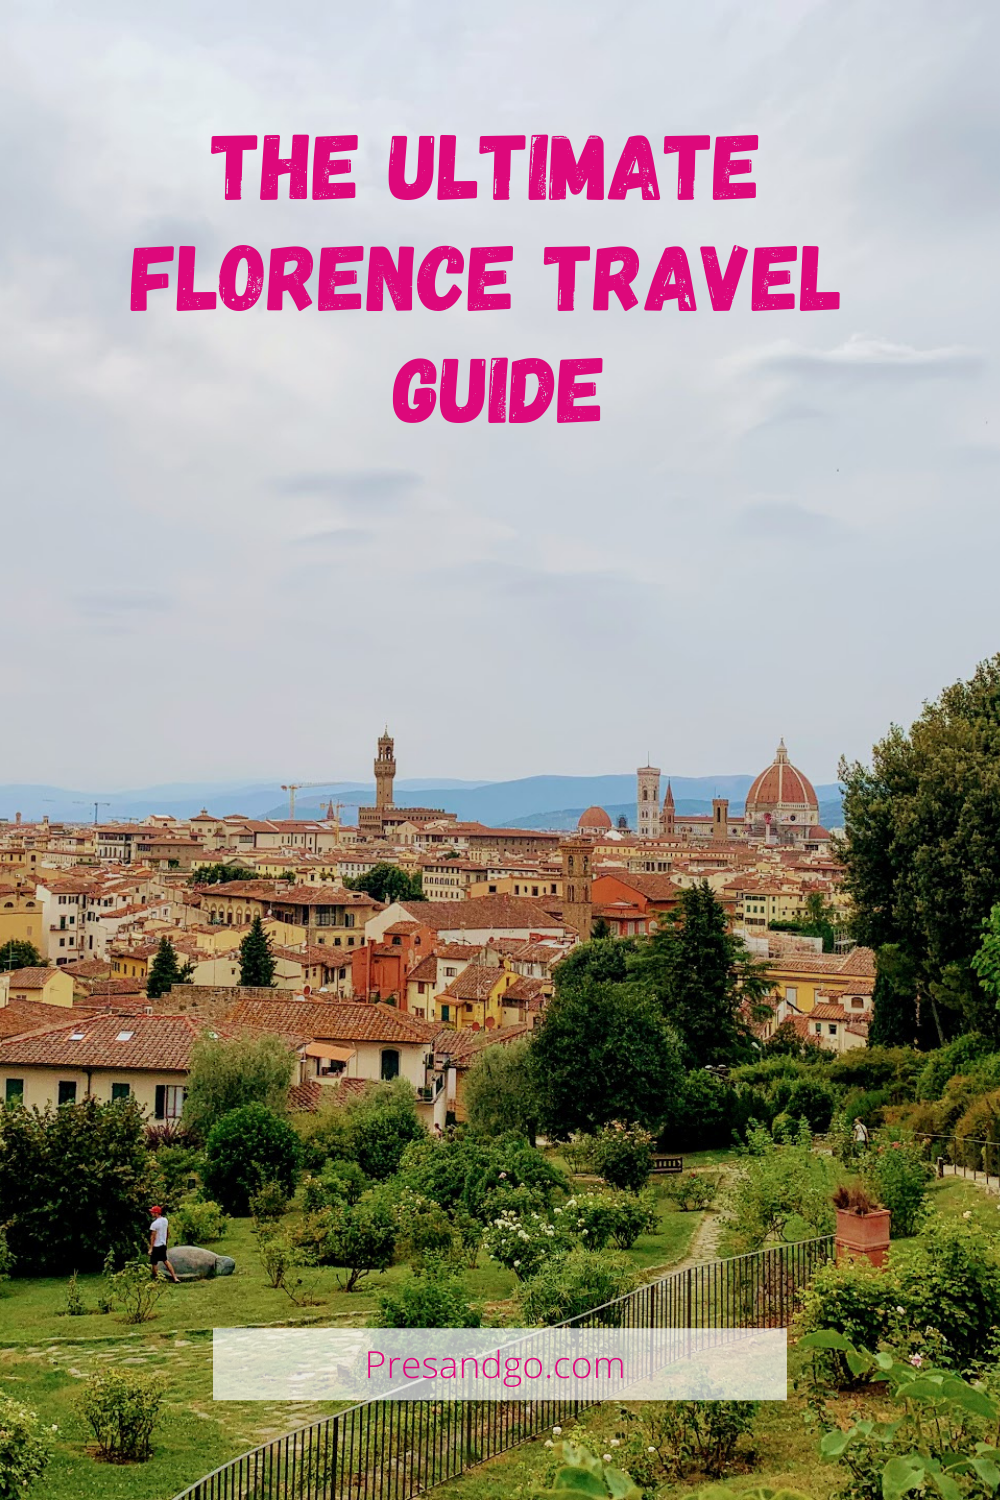 The Ultimate Florence Travel Guide